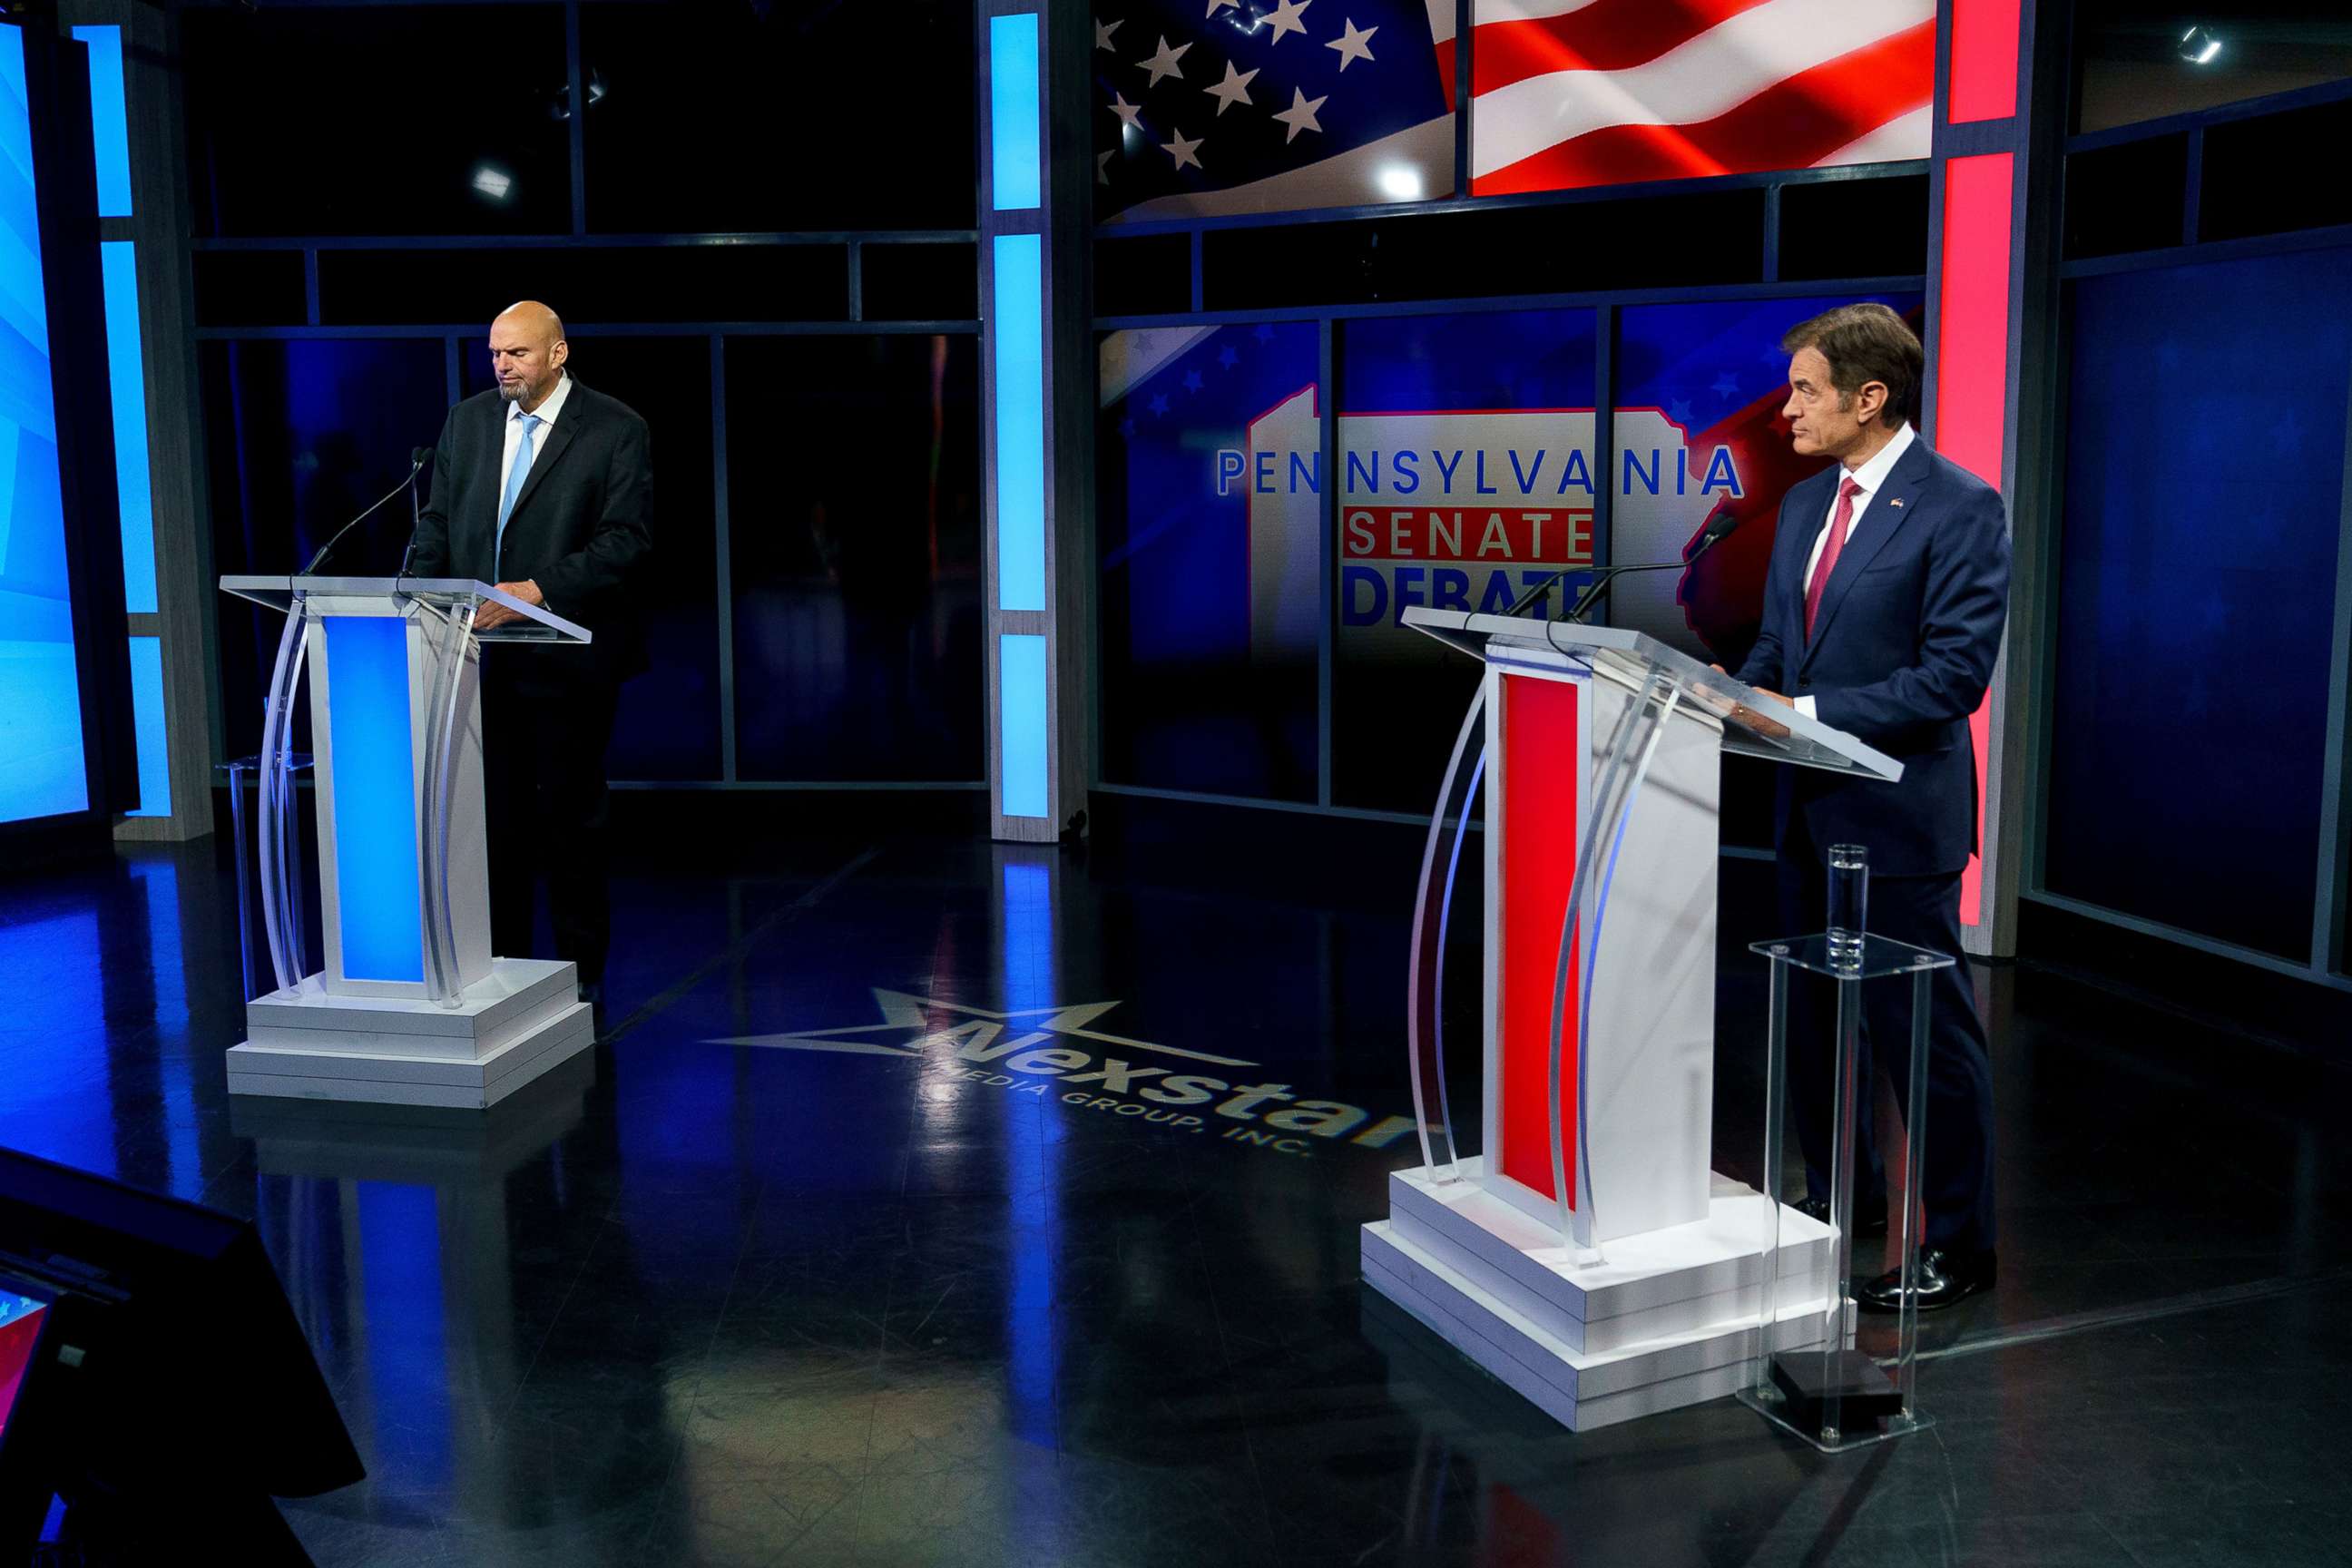 PHOTO: A handout photo made available by abc27 shows Democratic candidate Lt. Gov. John Fetterman (L) and Republican Pennsylvania Senate candidate Dr. Mehmet Oz (R) prior to the Nexstar Pennsylvania Senate Debate in Harrisburg, Penn., Oct. 25, 2022.